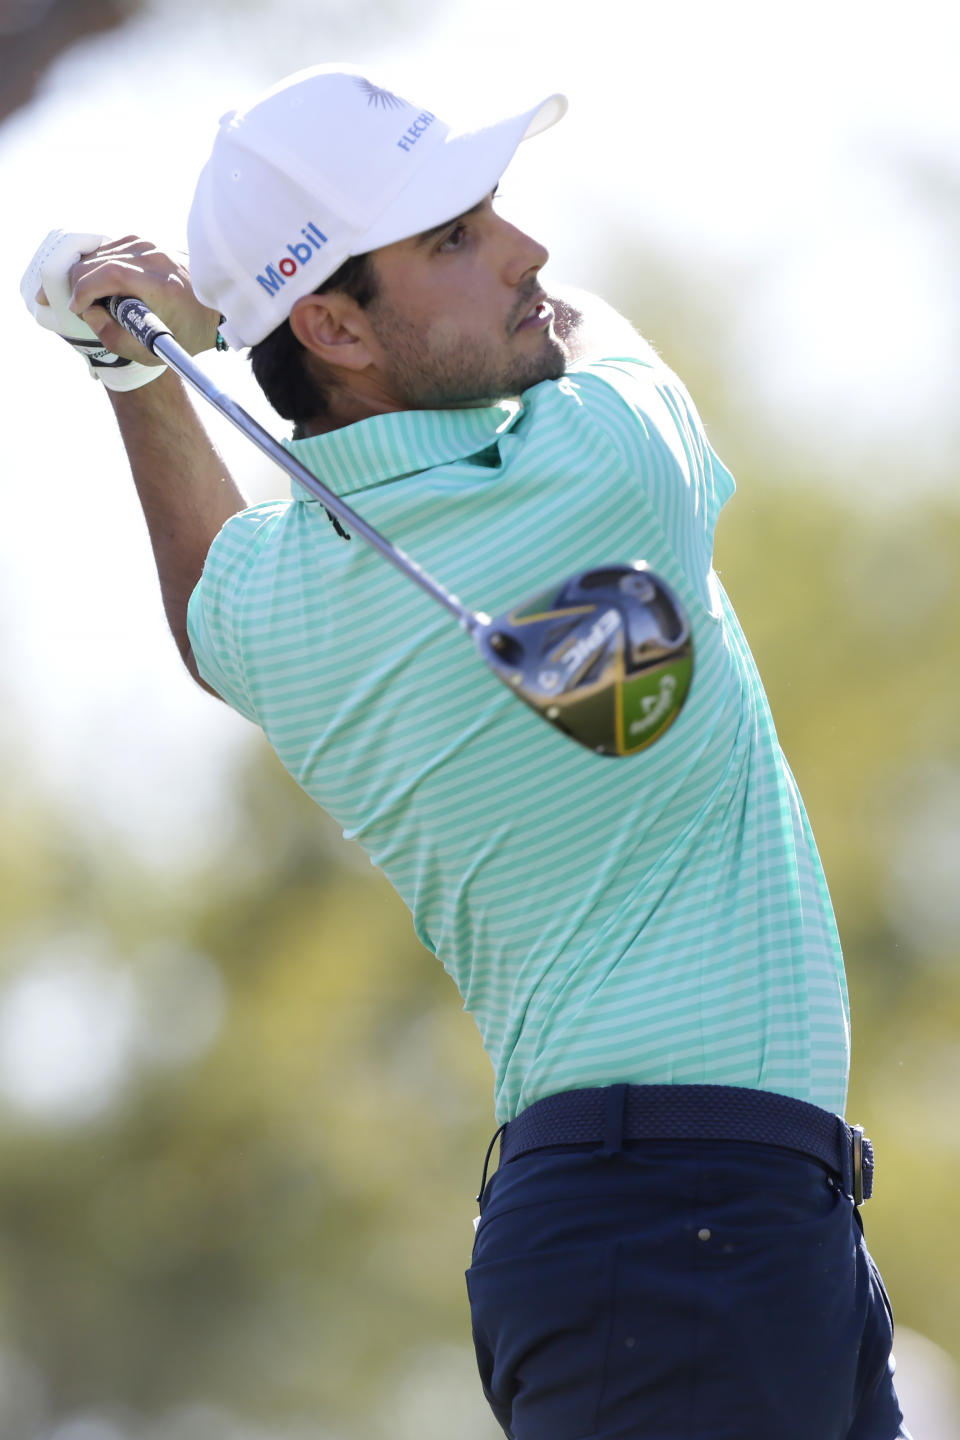 Abraham Ancer follows through on the third tee during the final round of The American Express golf tournament on the Stadium Course at PGA West in La Quinta, Calif., Sunday, Jan. 19, 2020. (AP Photo/Alex Gallardo)